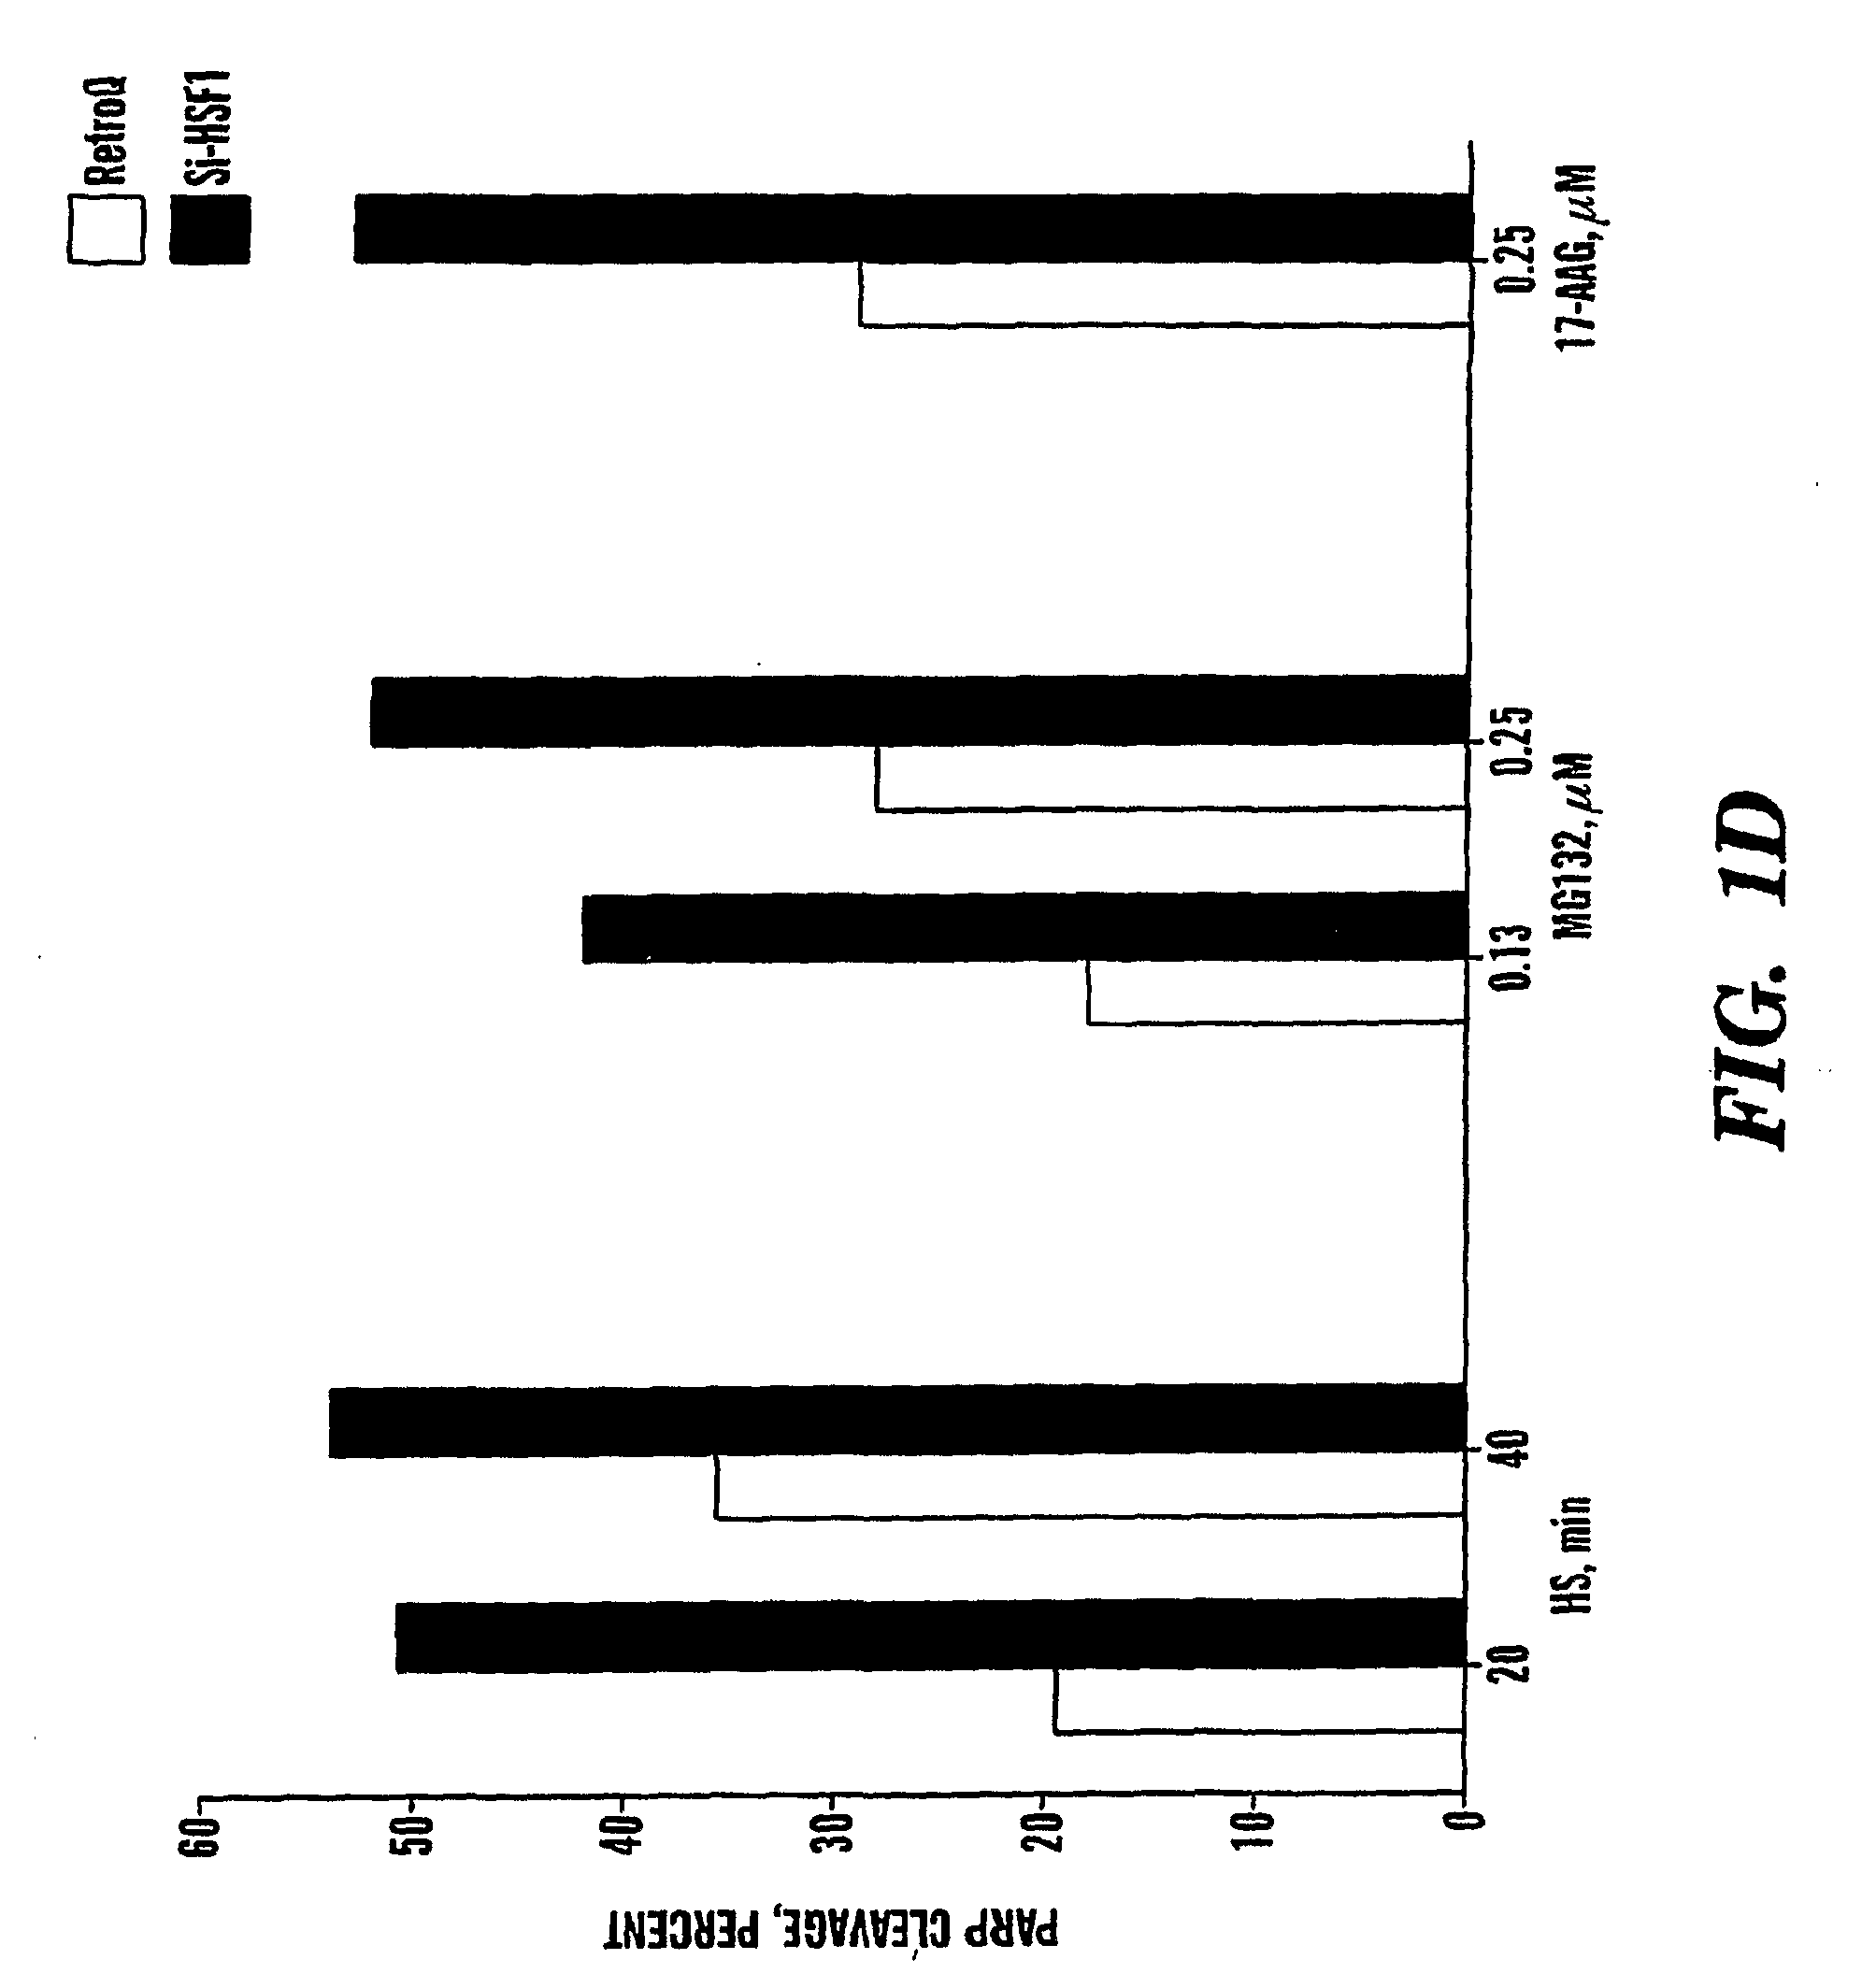 Methods for Sensitizing Cancer Cells to Inhibitors